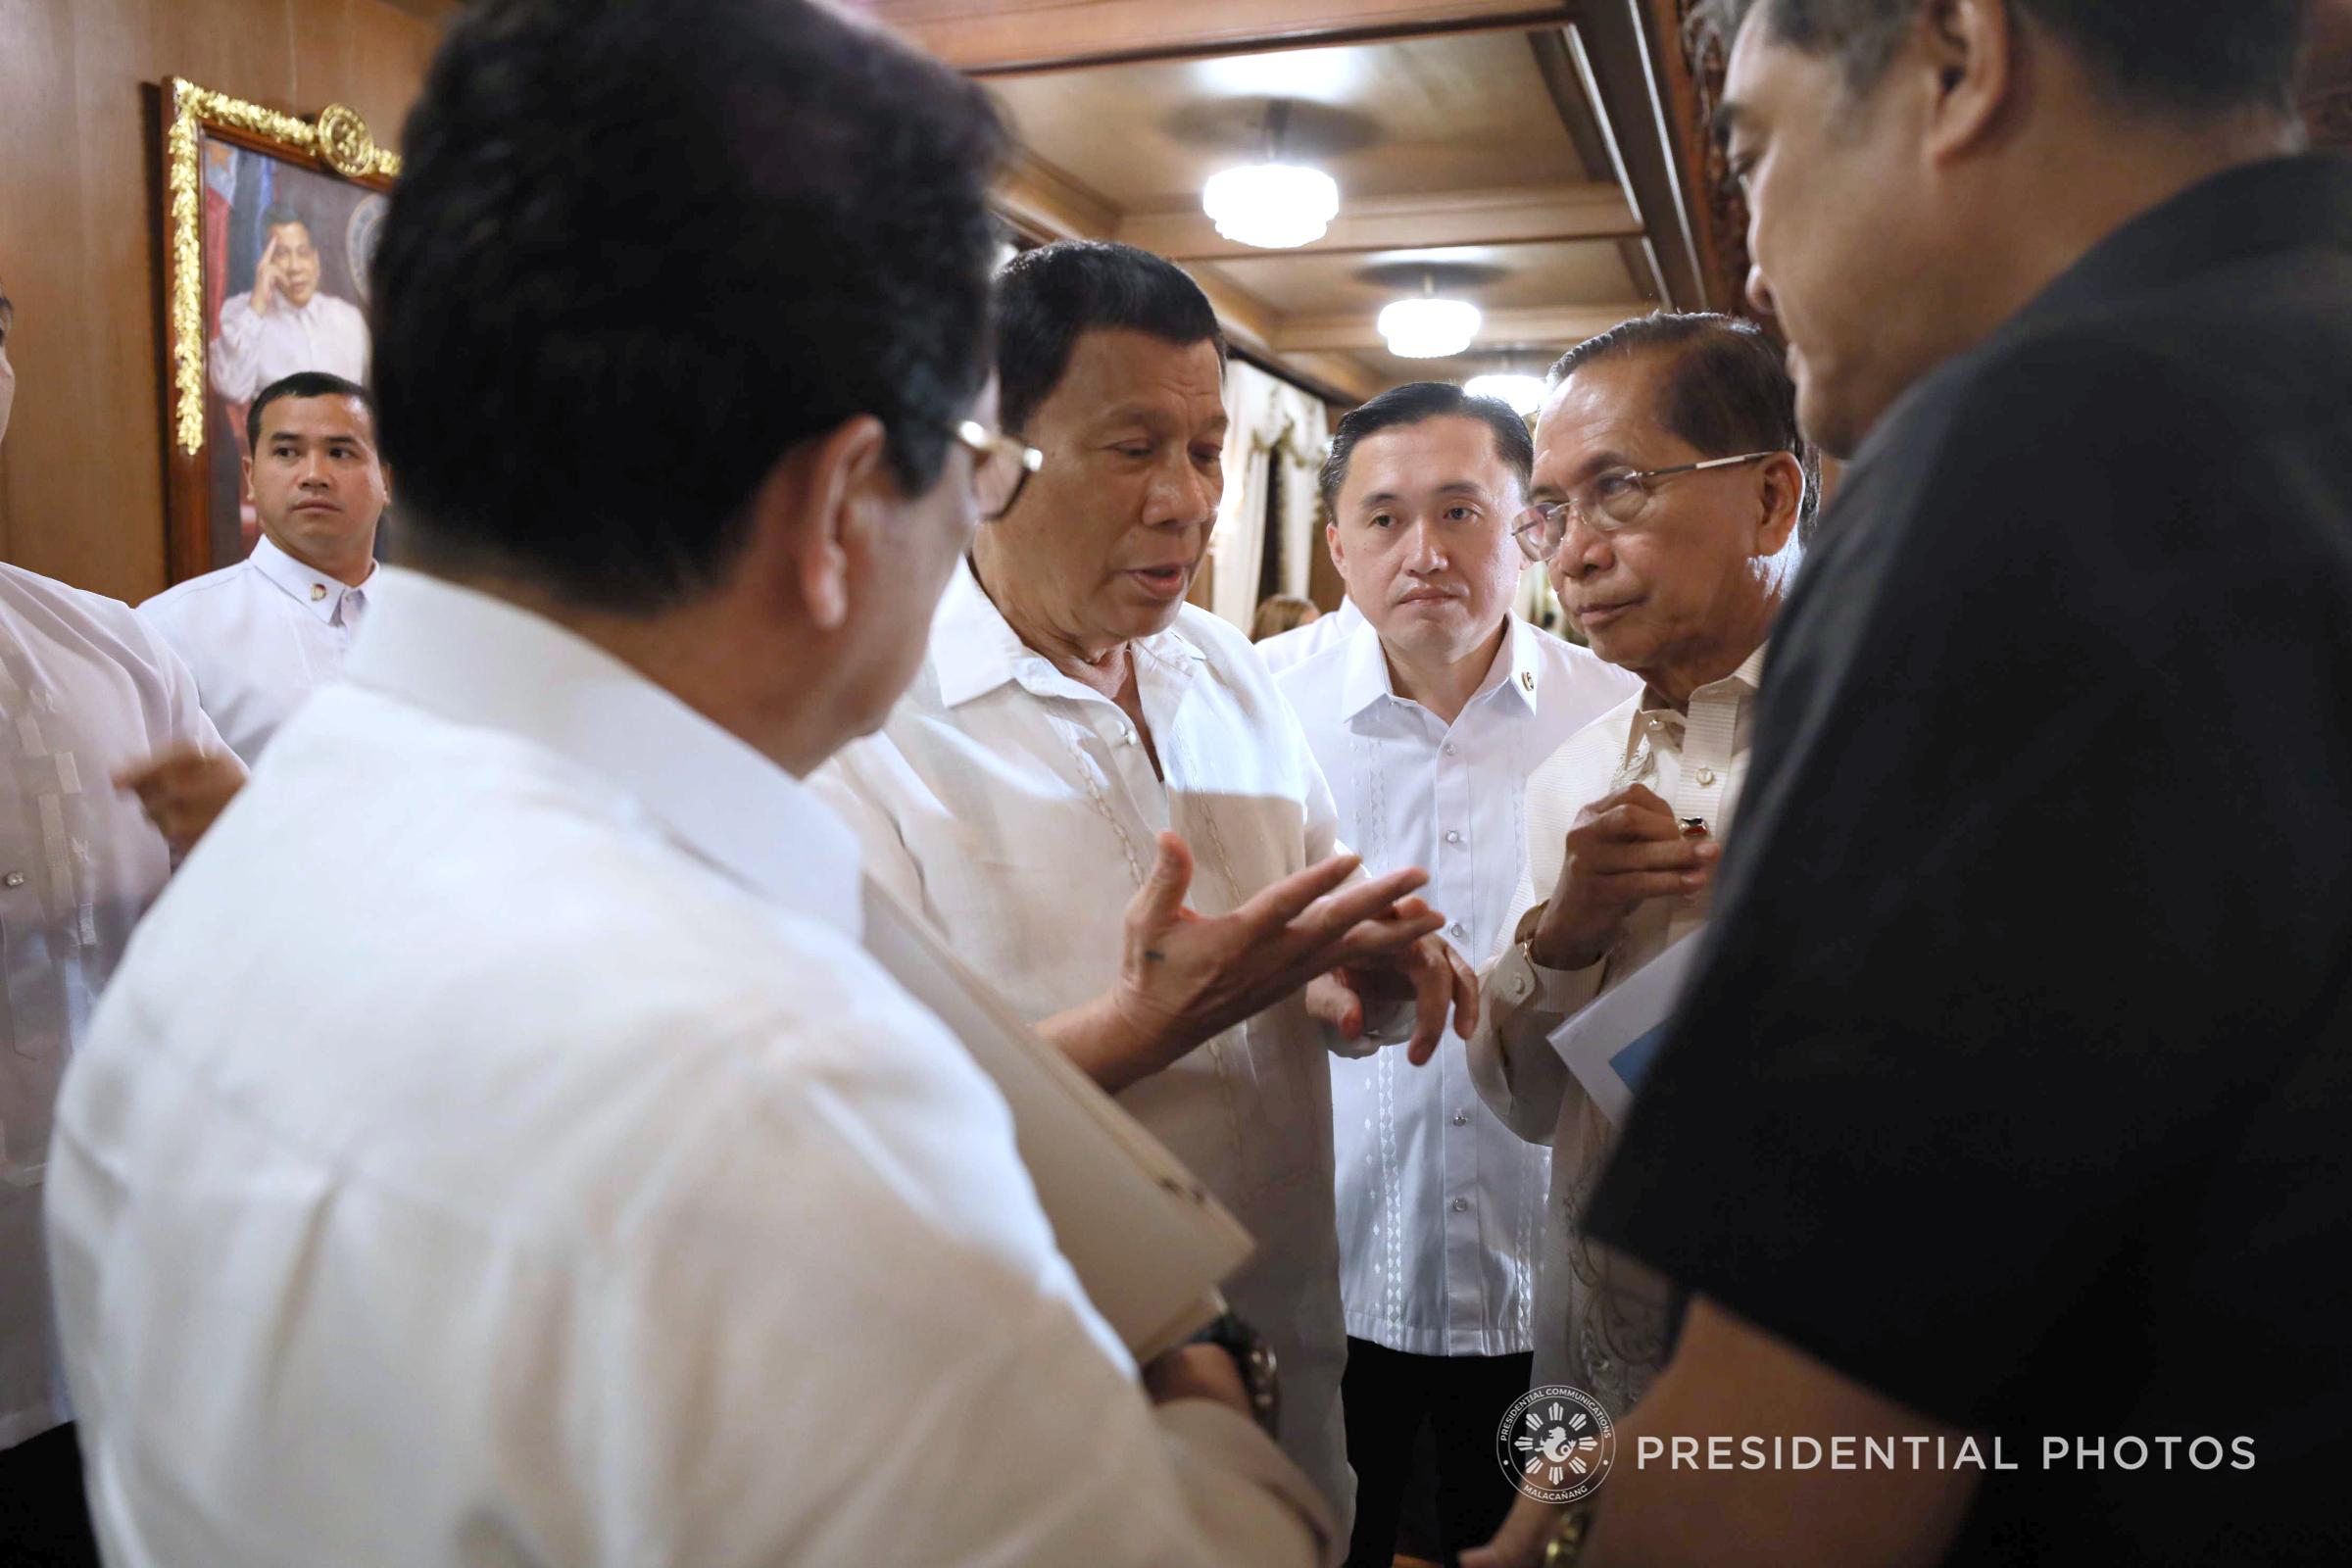 GREEN LIGHT. President Rodrigo Duterte meets with government negotiators after ordering the resumption of talks with communist rebels. Malacañang photo